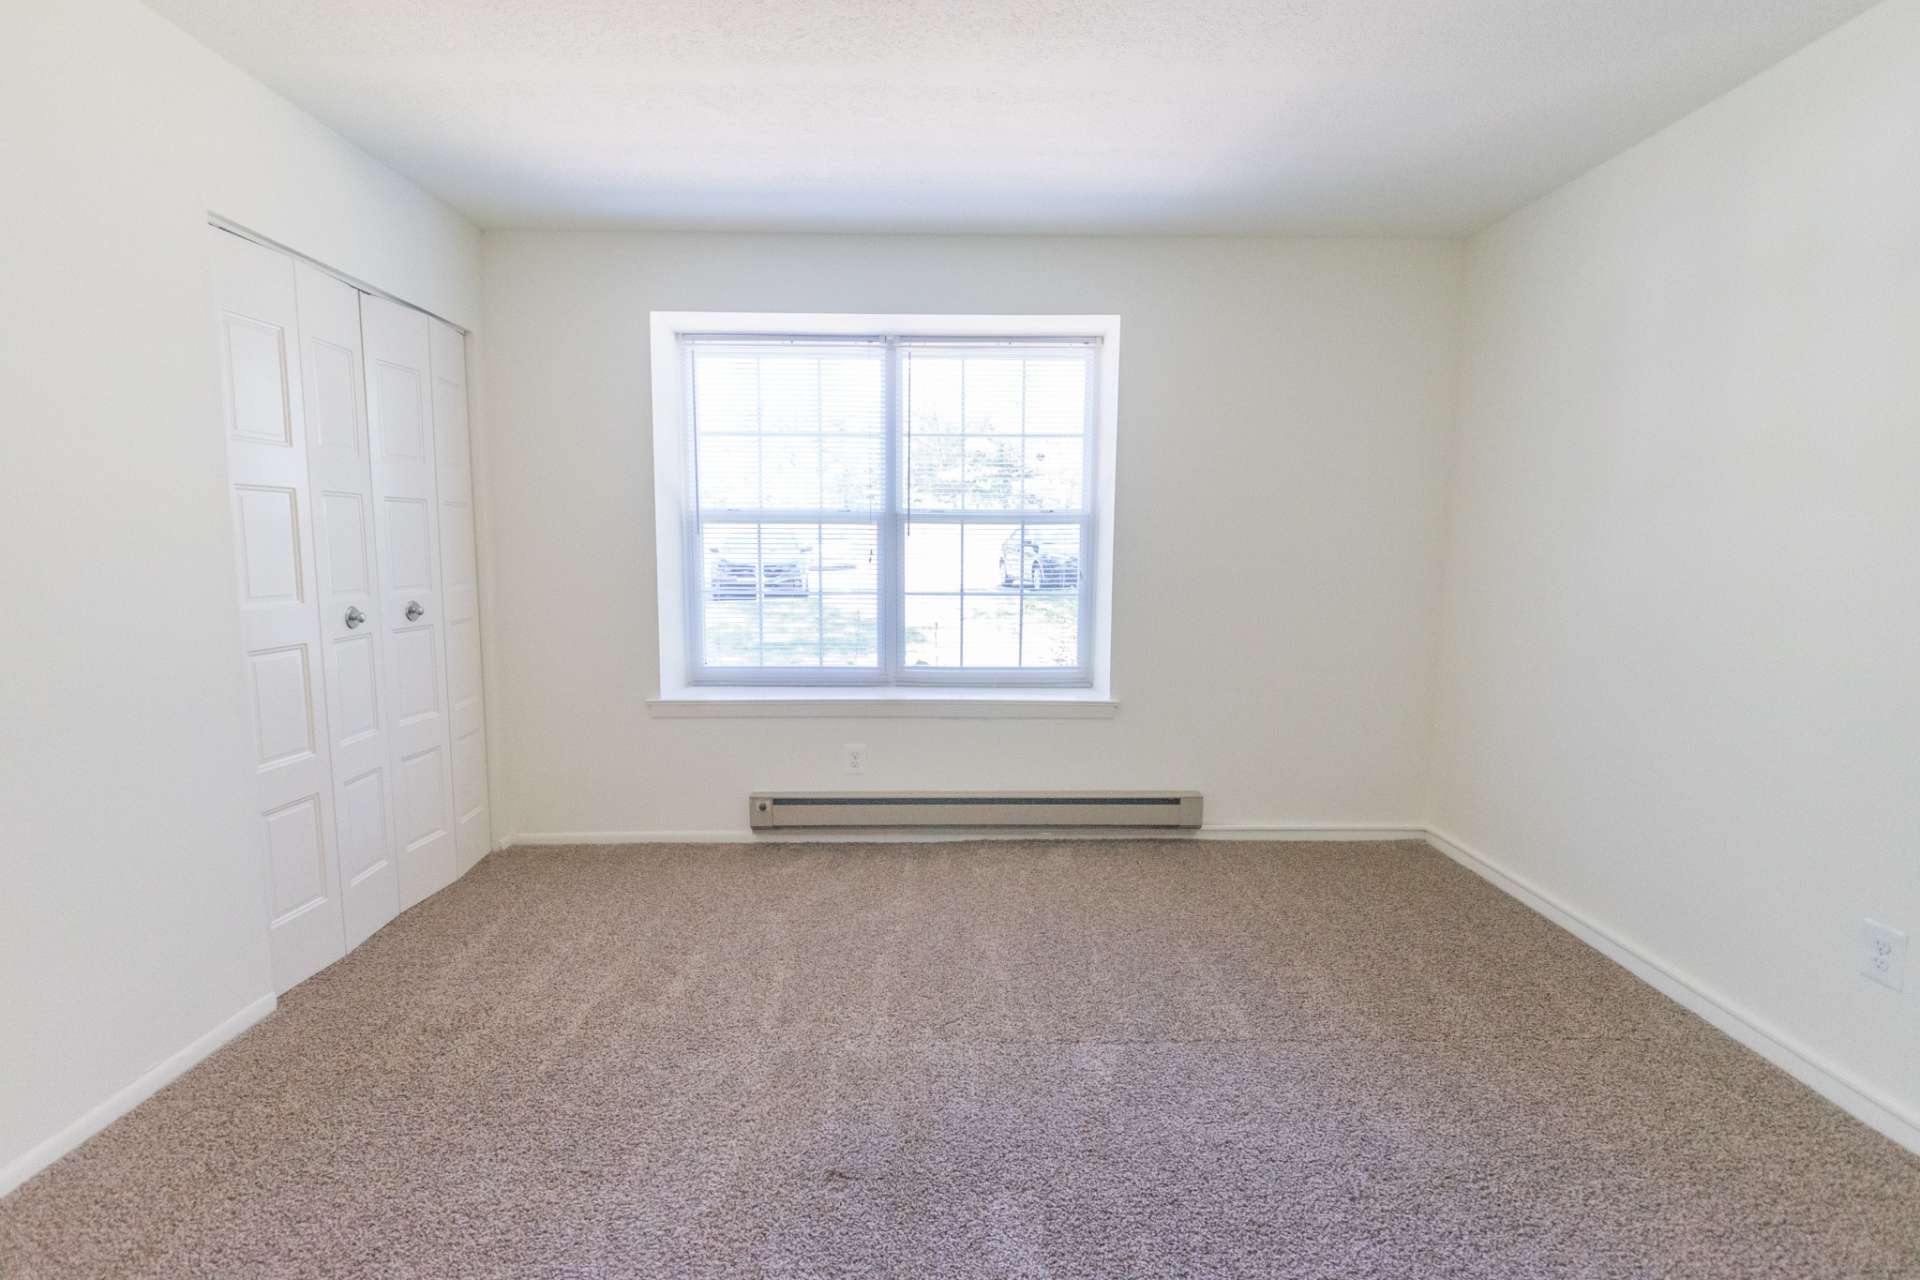 Willow Run Apartments carpeted bedroom with large window and heating